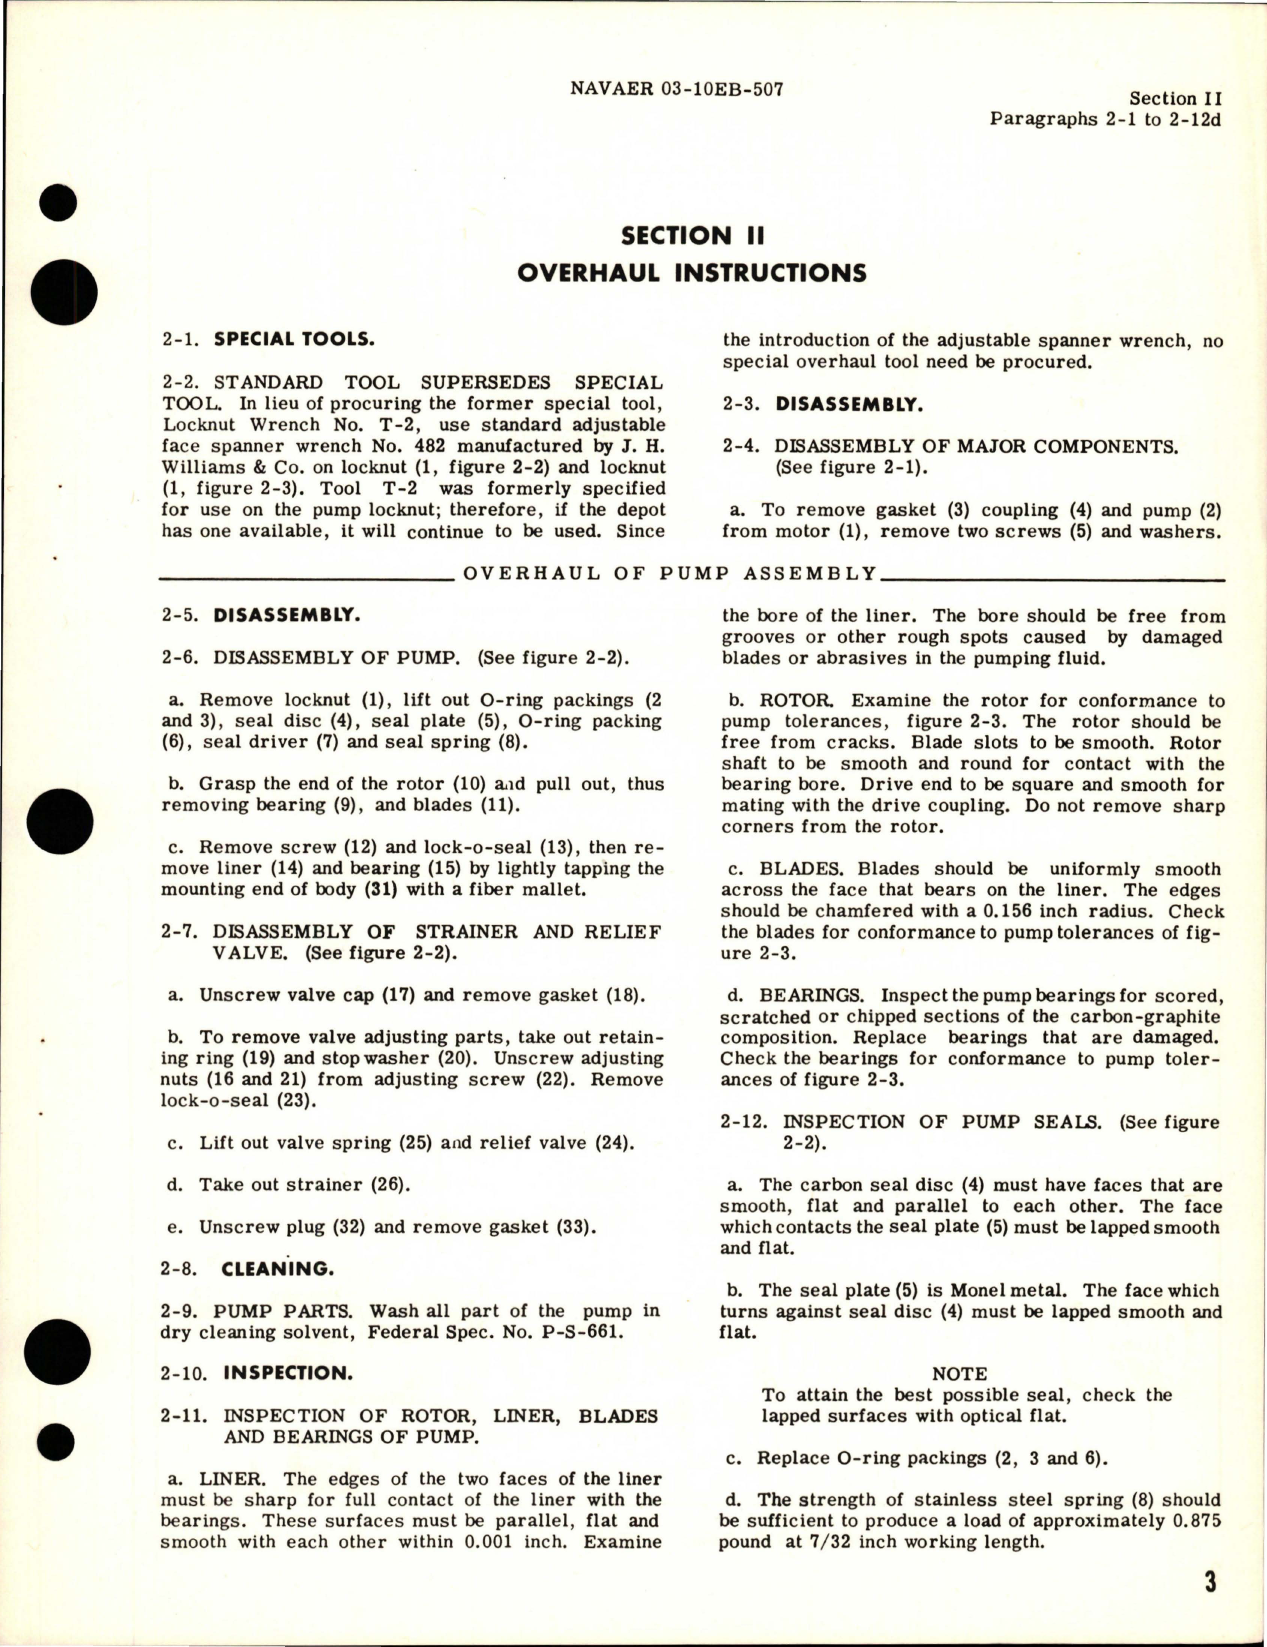 Sample page 7 from AirCorps Library document: Overhaul Instructions for Fuel Filter De-Icing Alcohol Pump - Model RG-5490-E 